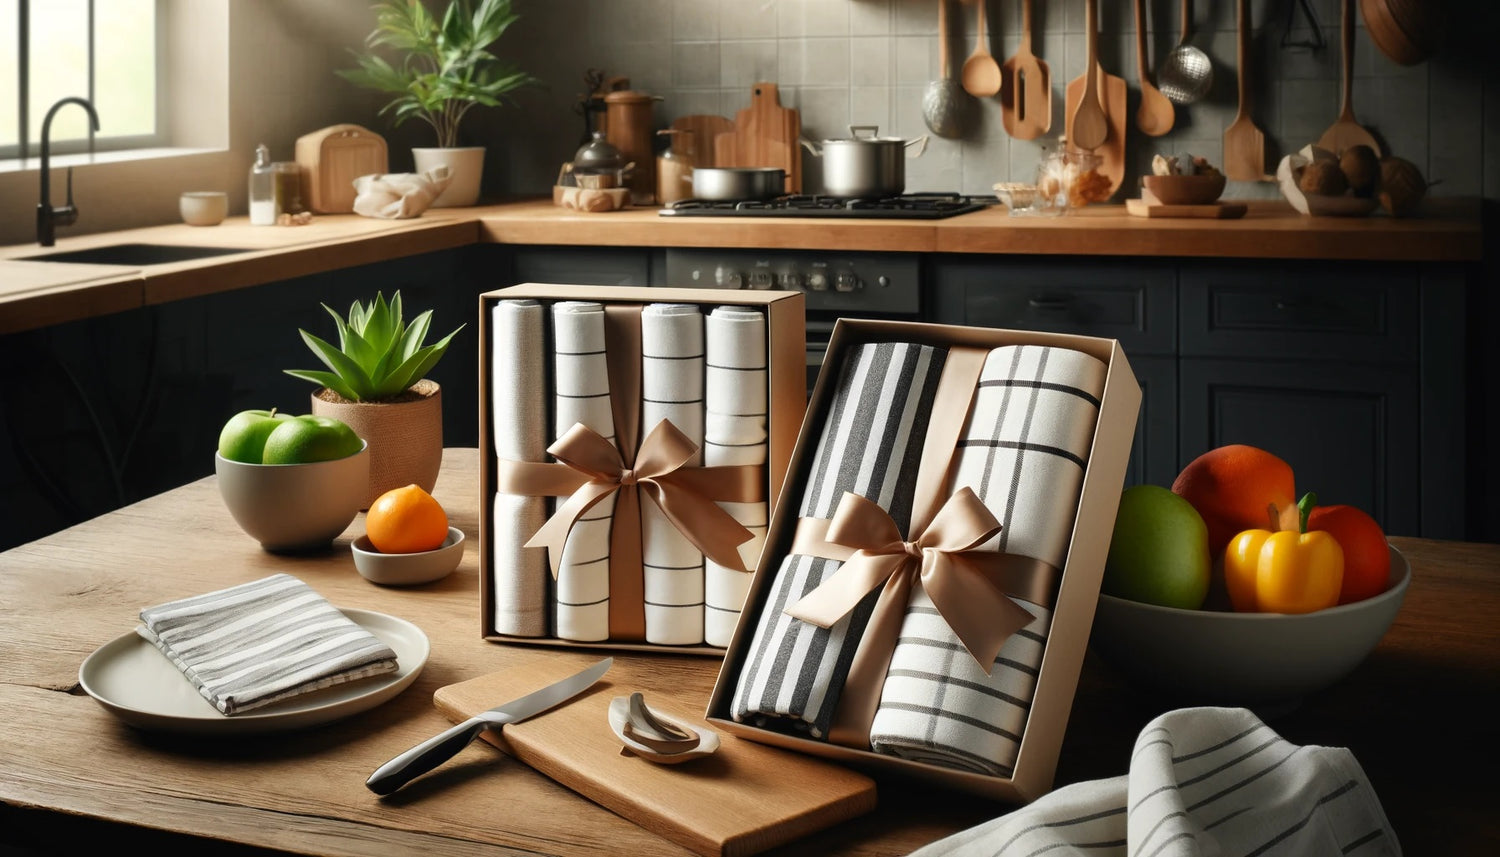 Cozy and modern kitchen setting with high-quality cotton kitchen towels, including one checkered and three striped, neatly folded and presented in a stylish gift box with gourmet cooking utensils and fresh fruits.